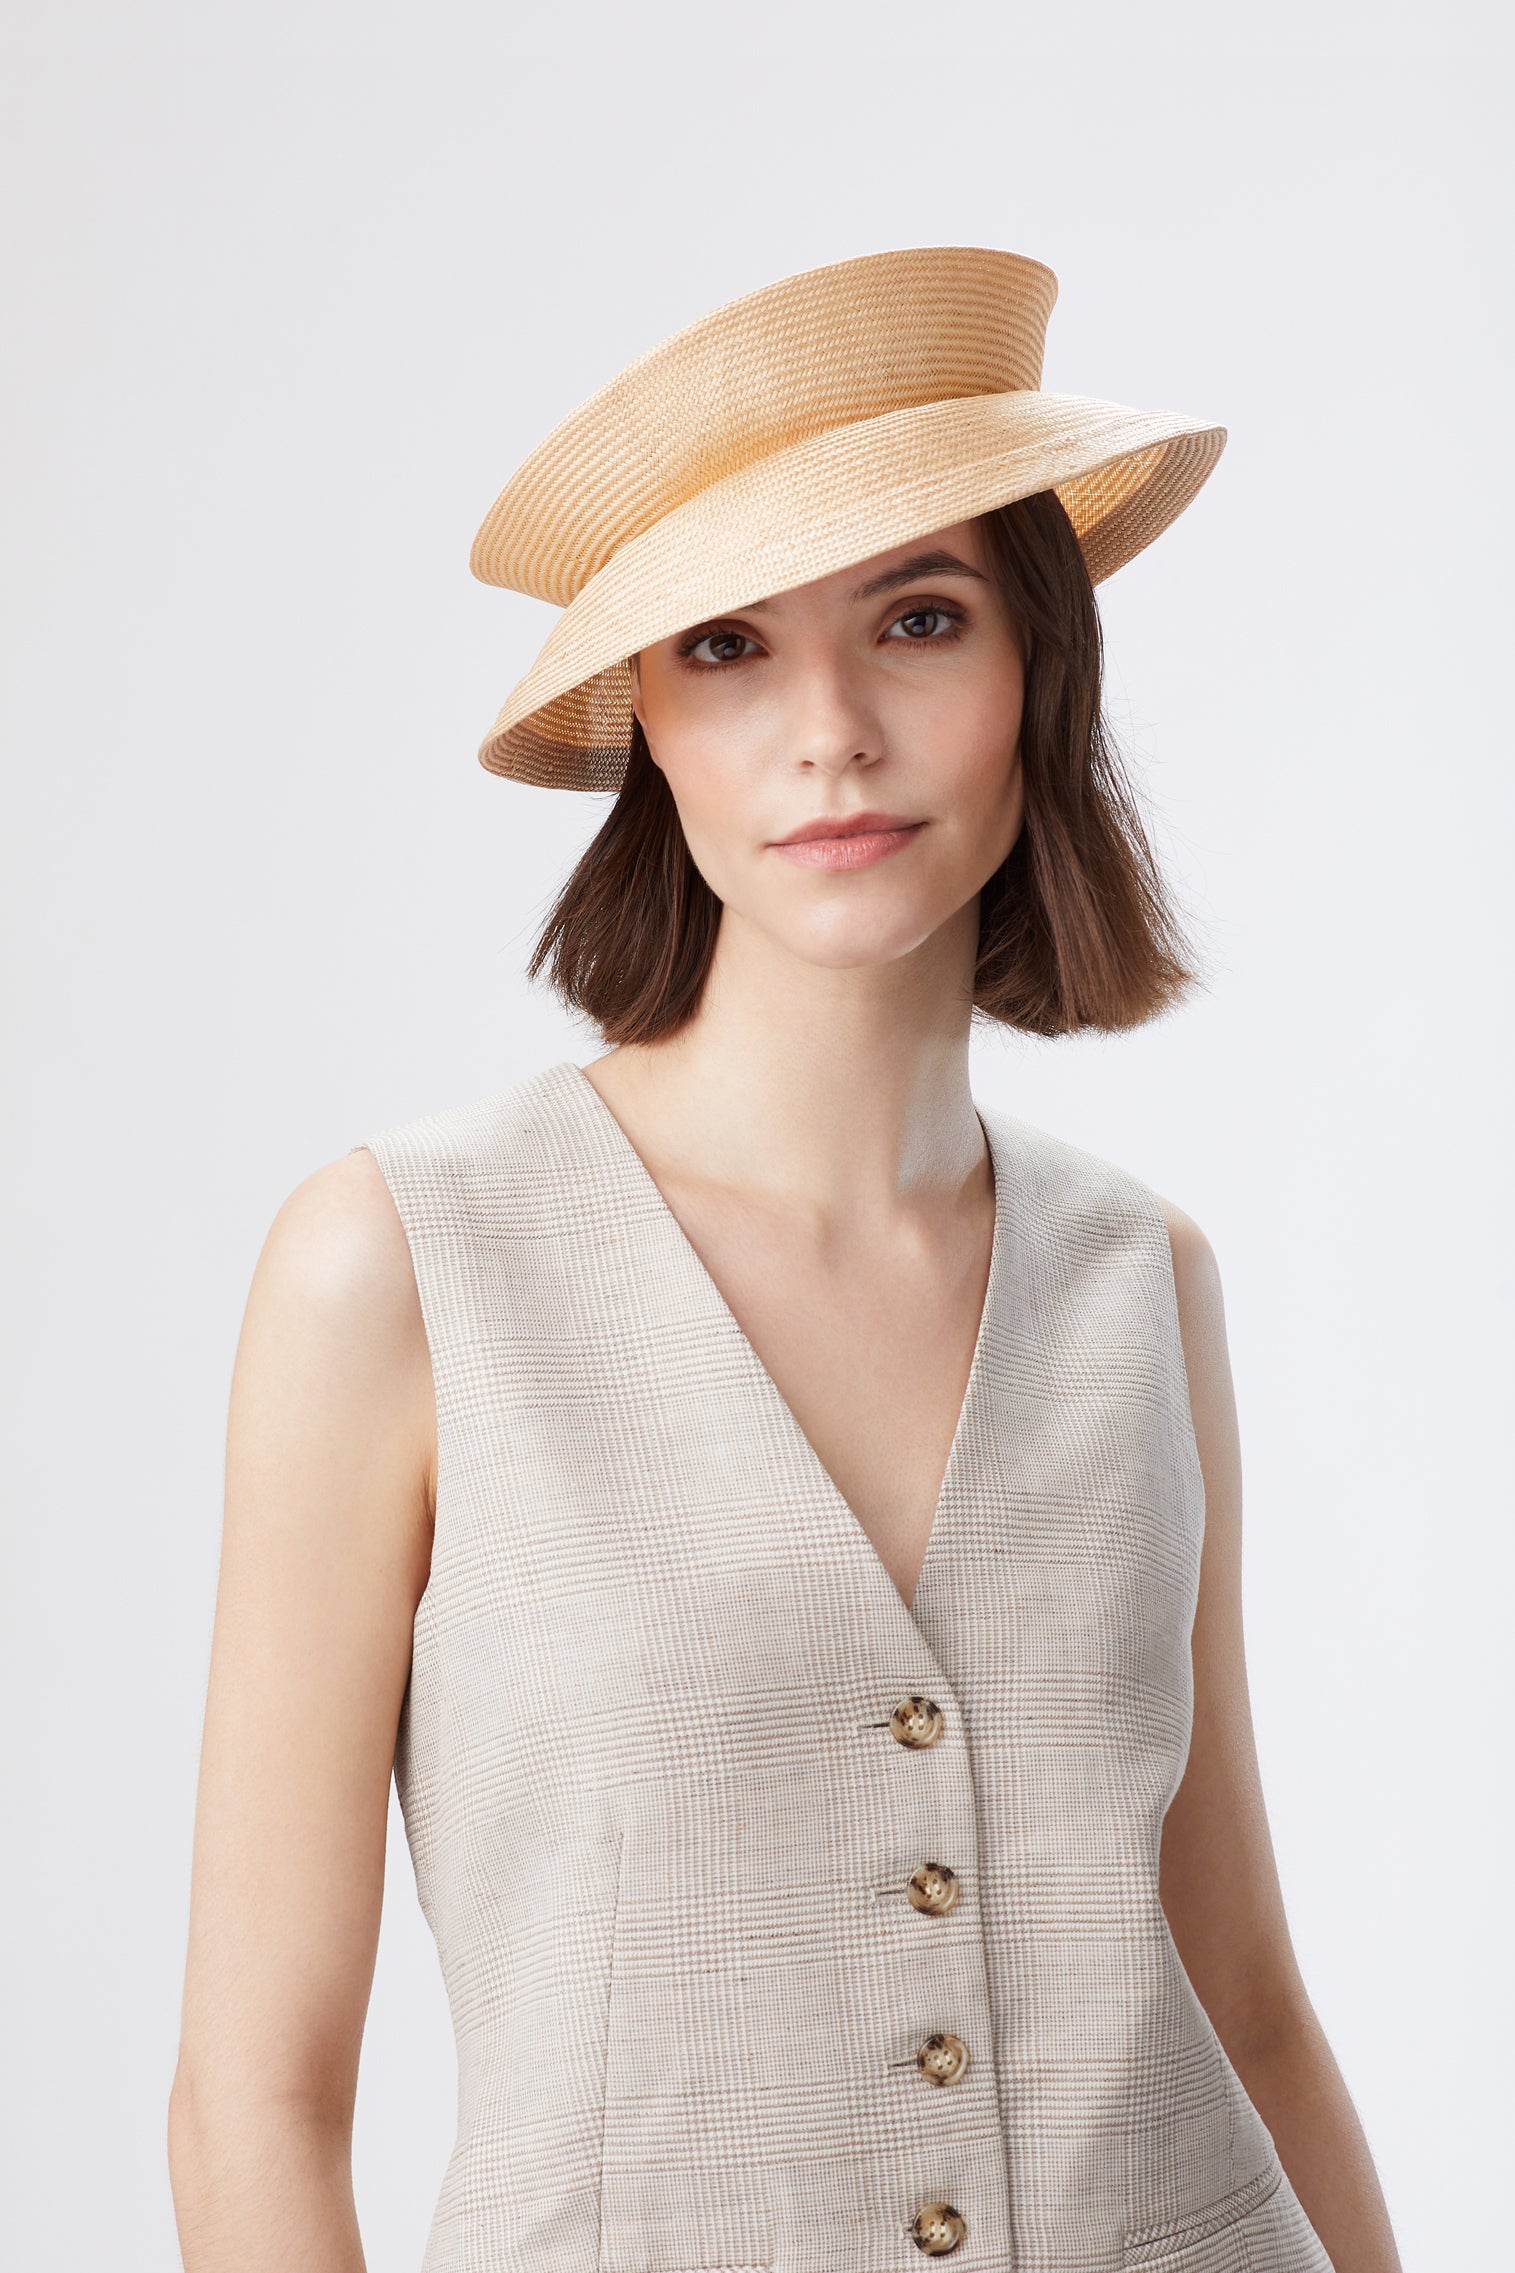 Women's Hats - Elegant Hats for Any Occasion - Lock & Co.